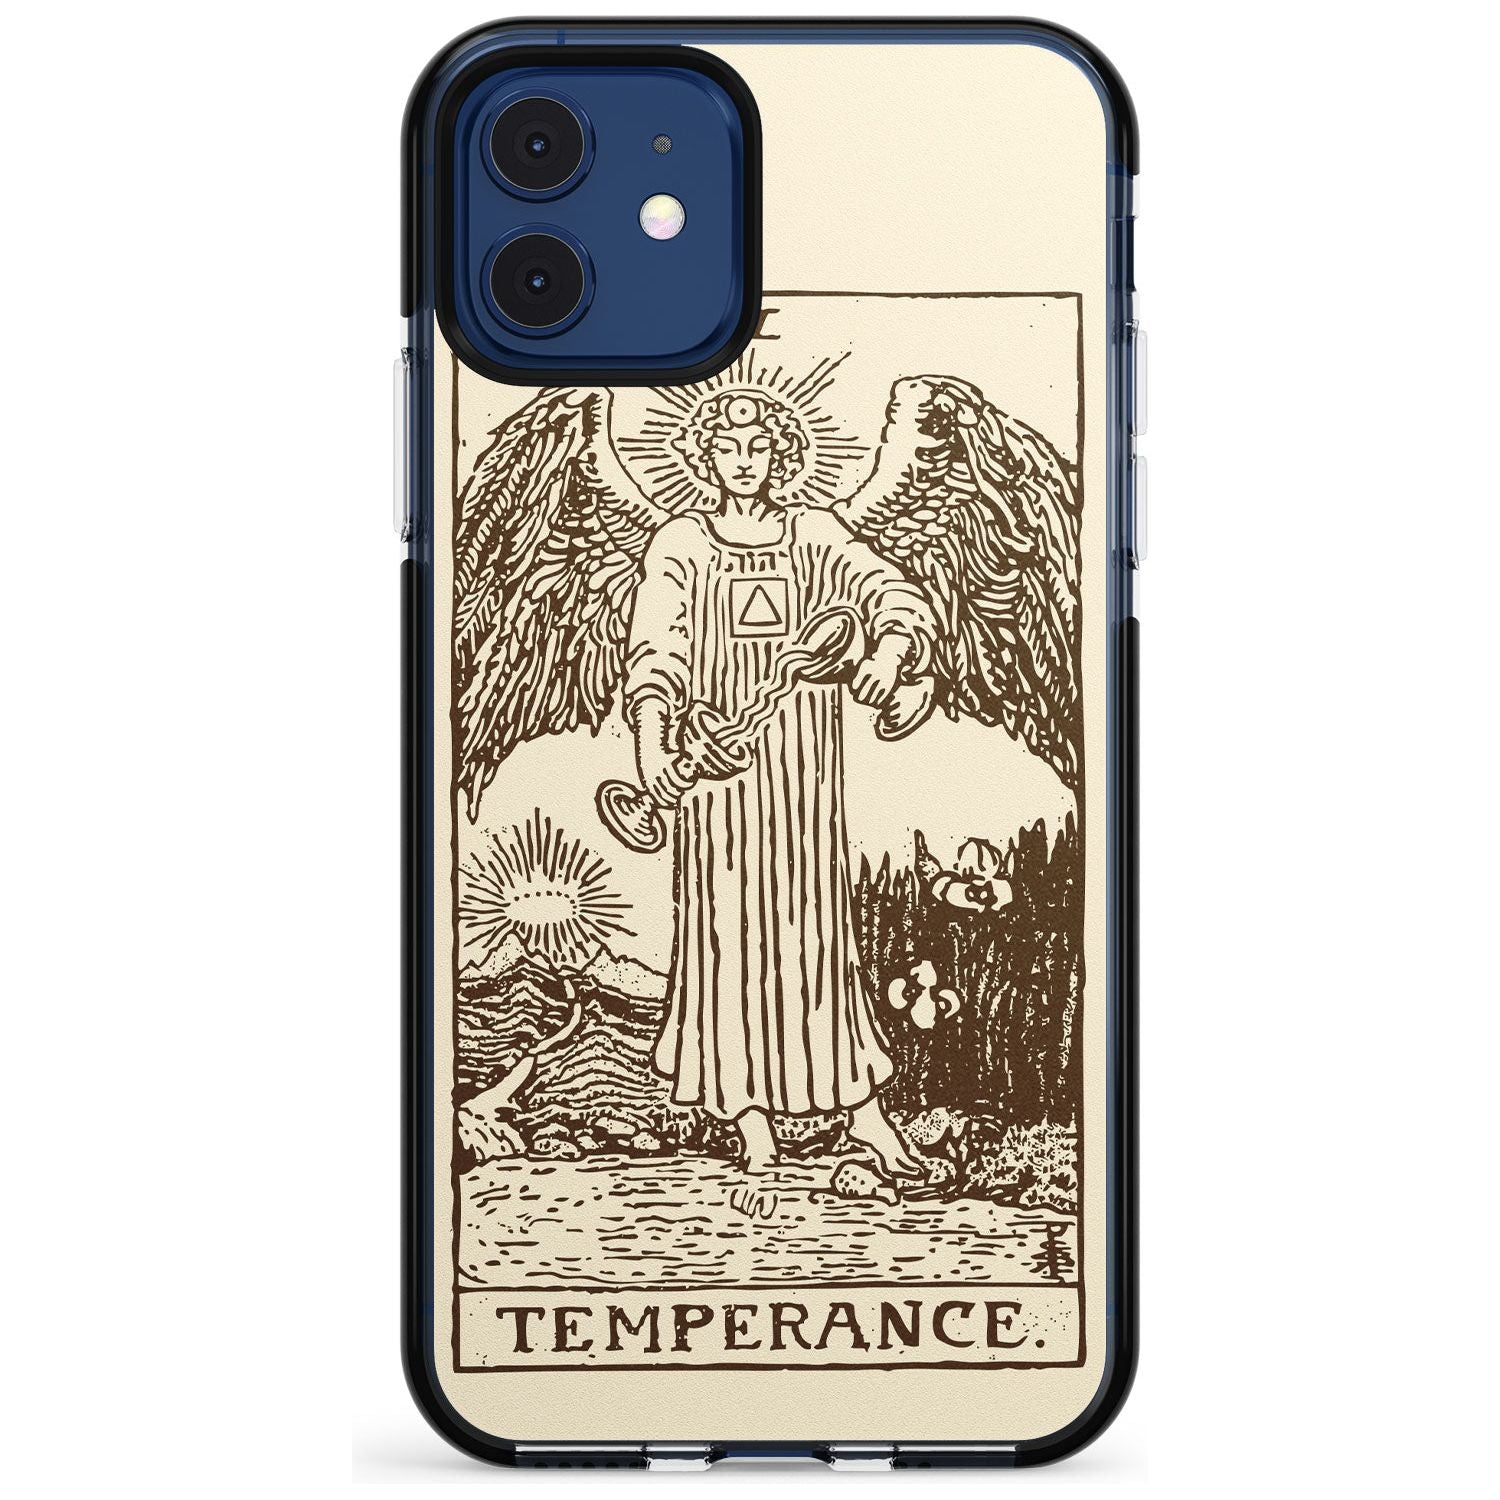 Temperance Tarot Card - Solid Cream Pink Fade Impact Phone Case for iPhone 11 Pro Max